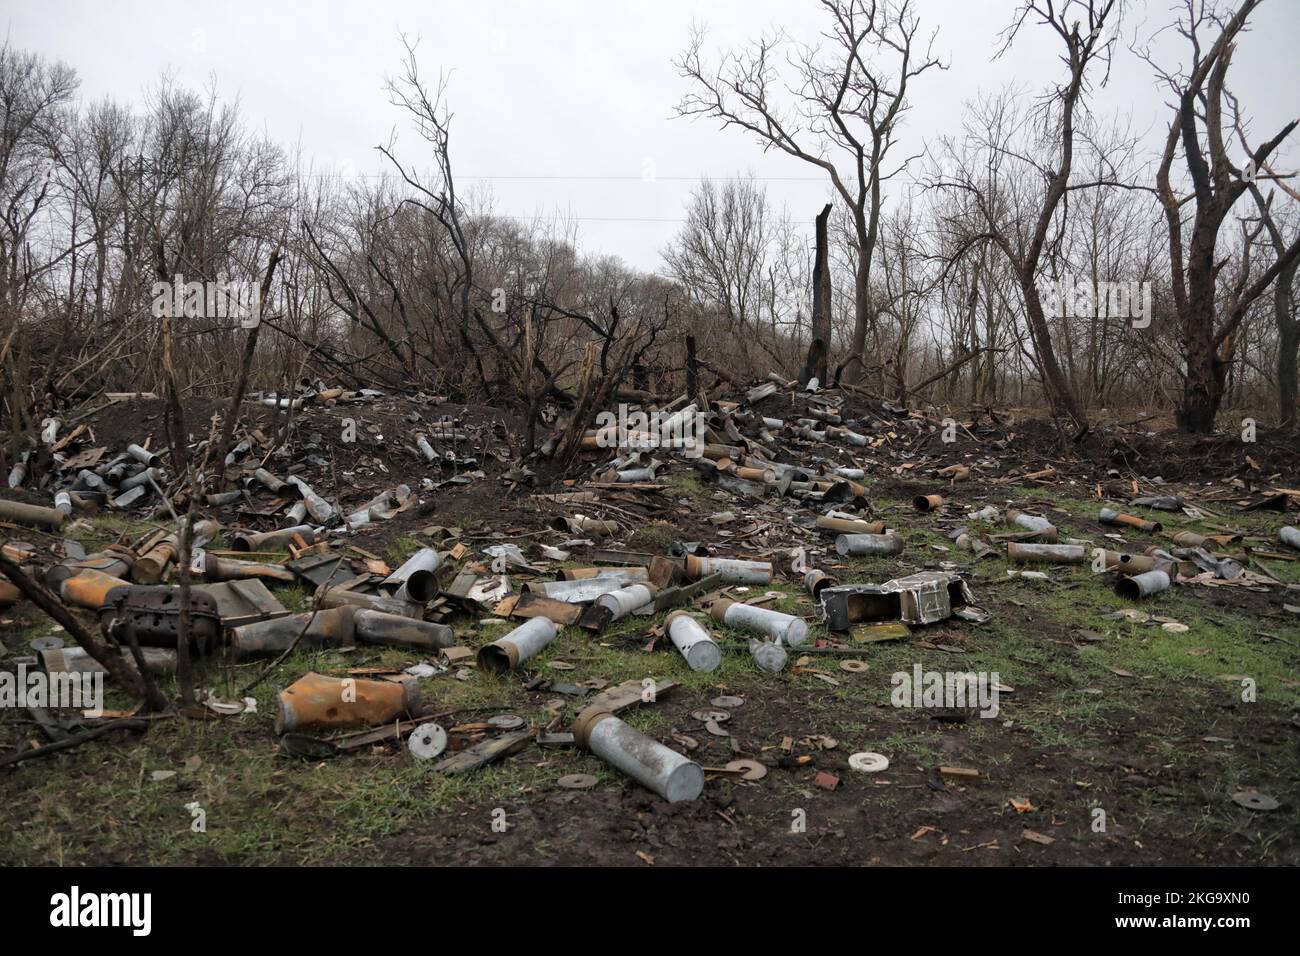 KHERSON REGION, UKRAINE - NOVEMBER 20, 2022 - Fragments of ammunition are seen near the village of Pravdino liberated from the Russian occupiers by the Ukrainian defenders, Kherson Region, southern Ukraine. Stock Photo